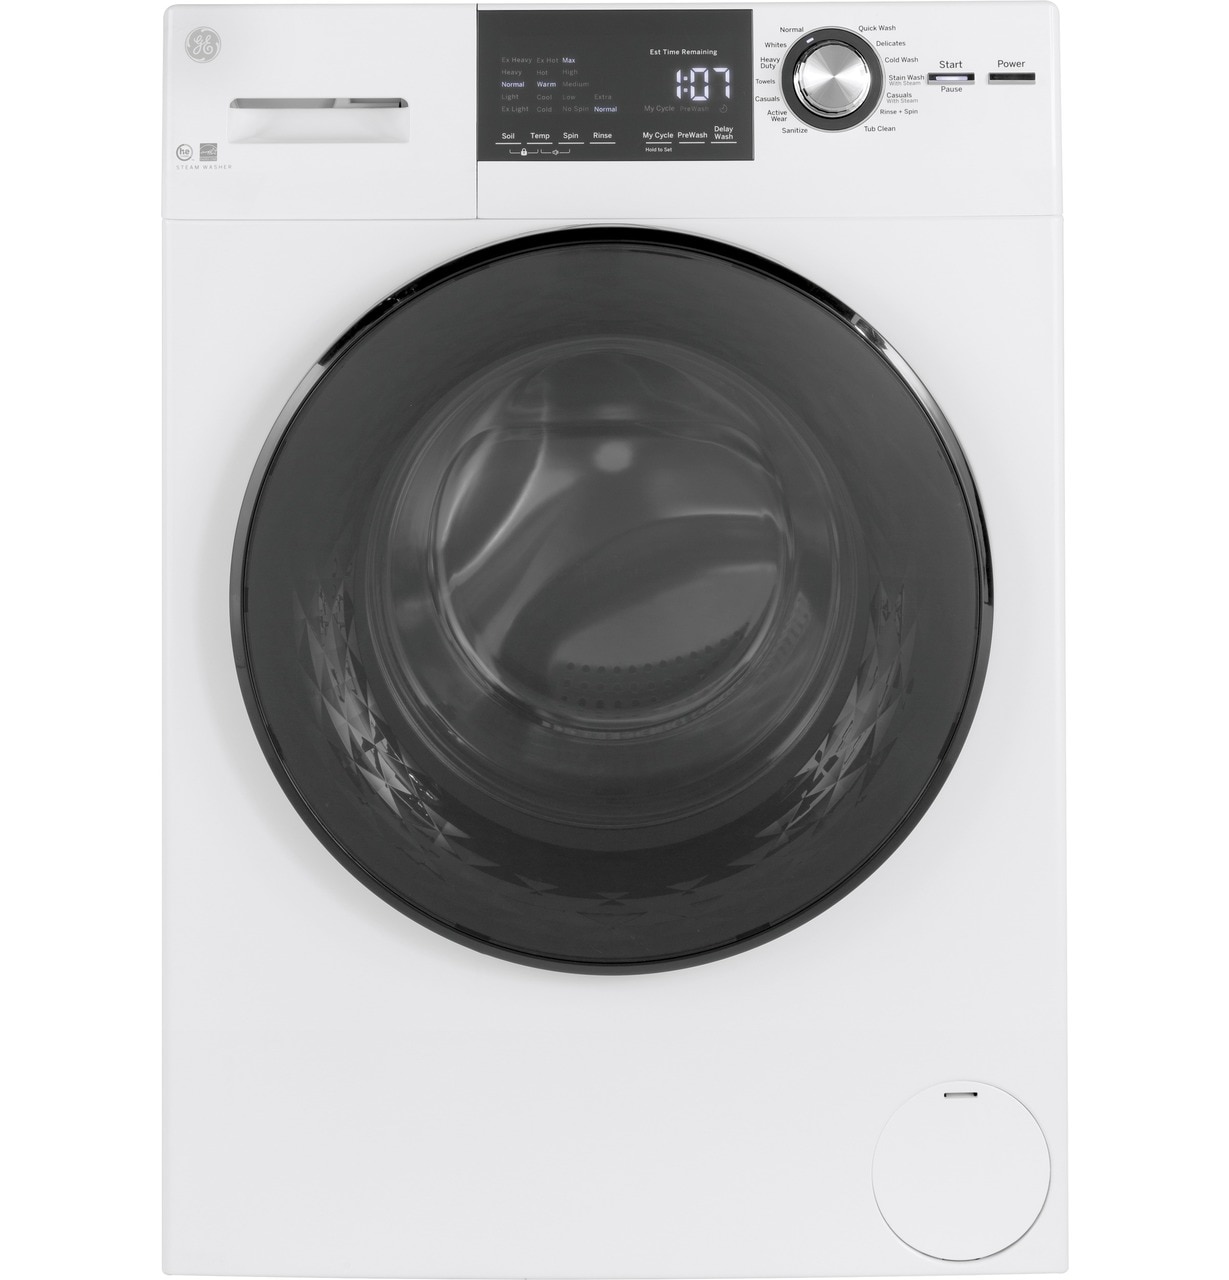 GE Appliances GFW148SSMWW 24" 2.4cu.ft. Front Load Washer with Steam - White